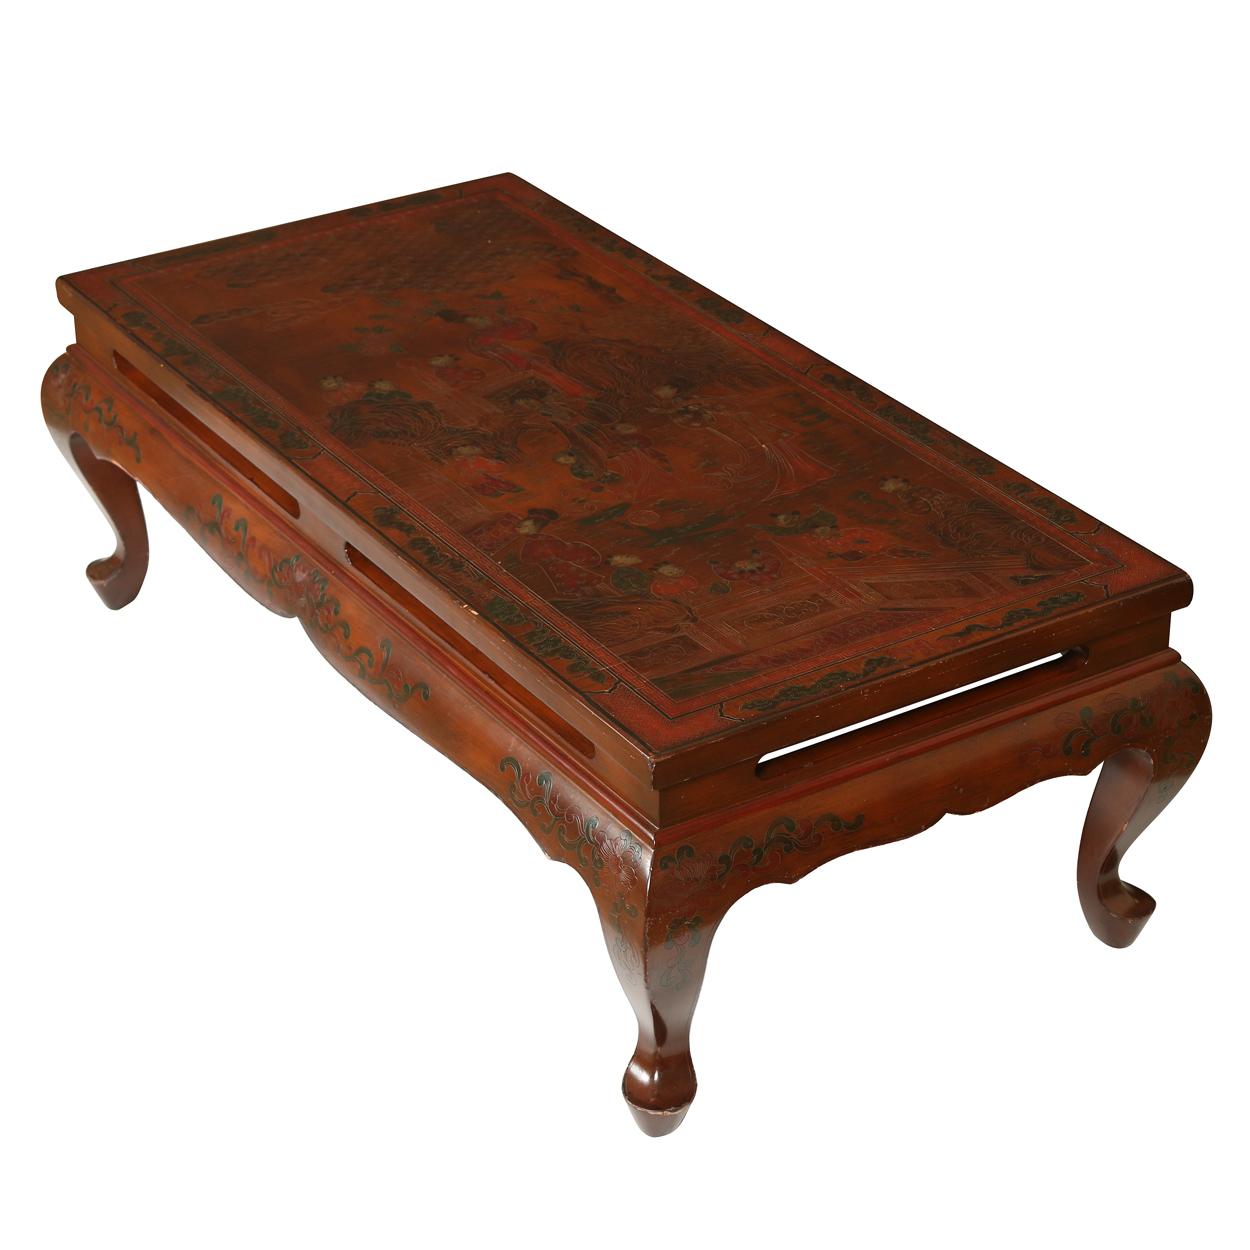 Chinoiserie painted table with figural scene on oxblood lacquered low table with curved apron and cabriole legs.